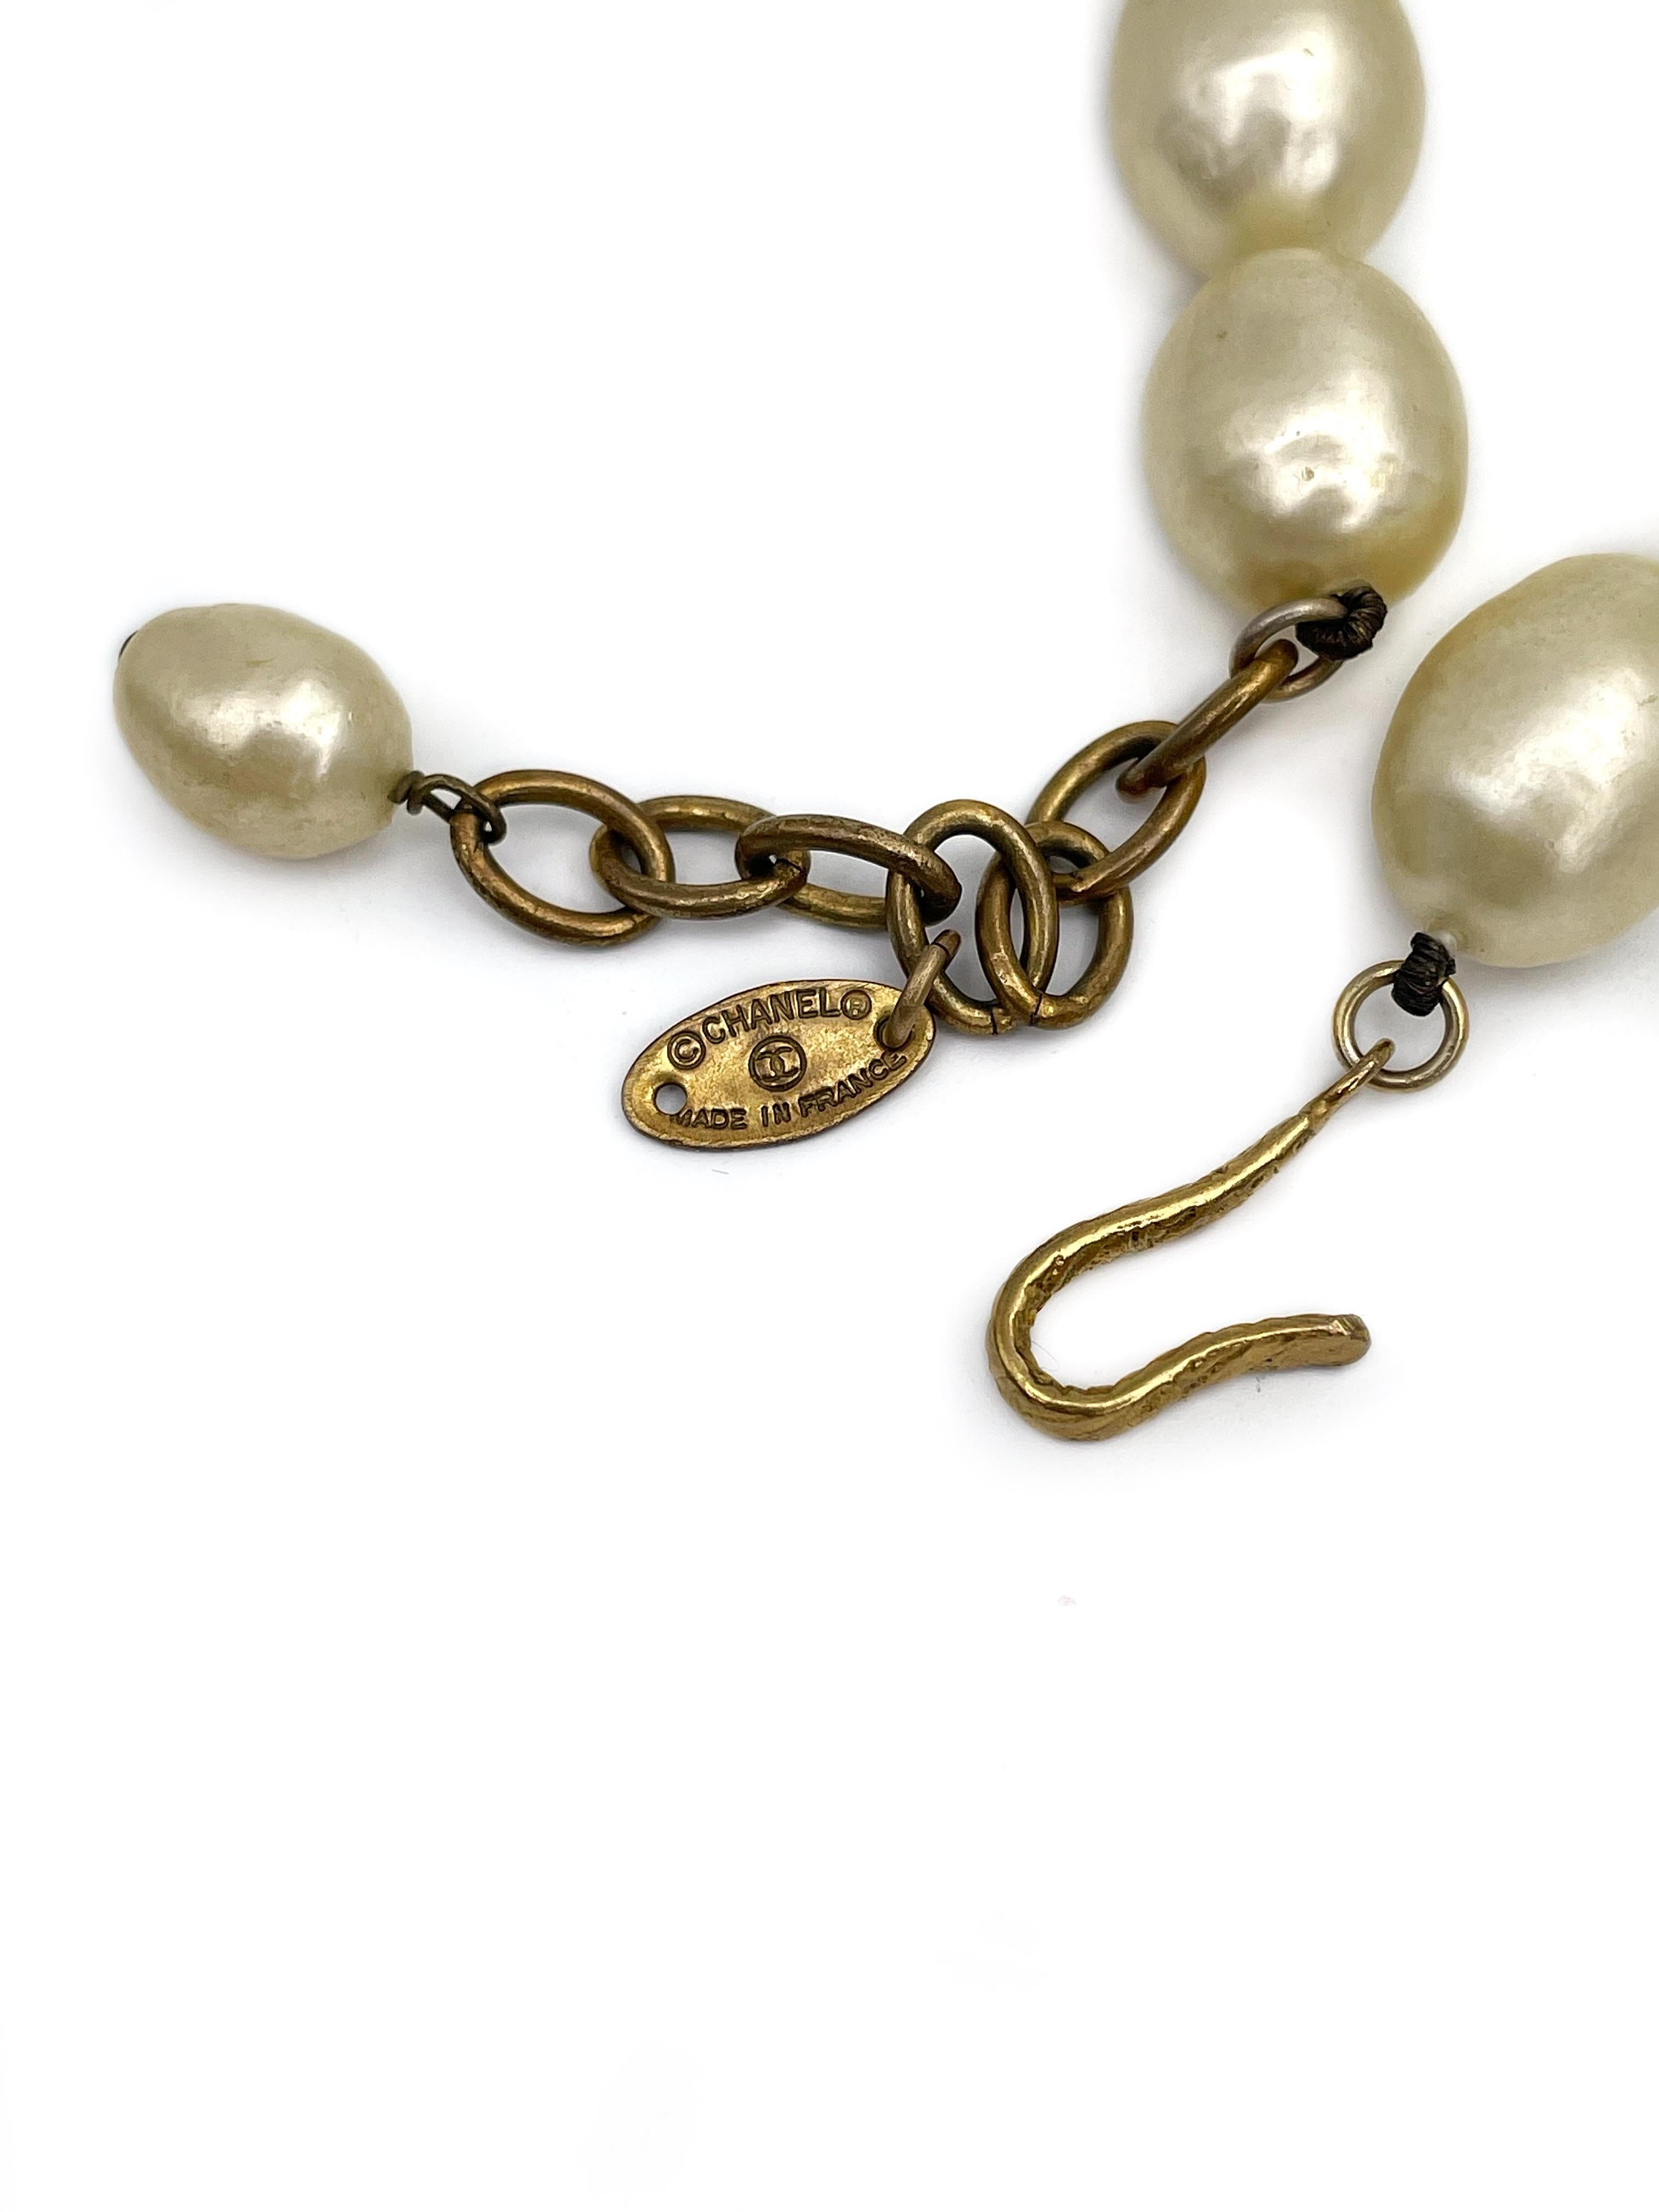 Modern 1970s Vintage Chanel Creamy Faux Pearl Collier Necklace